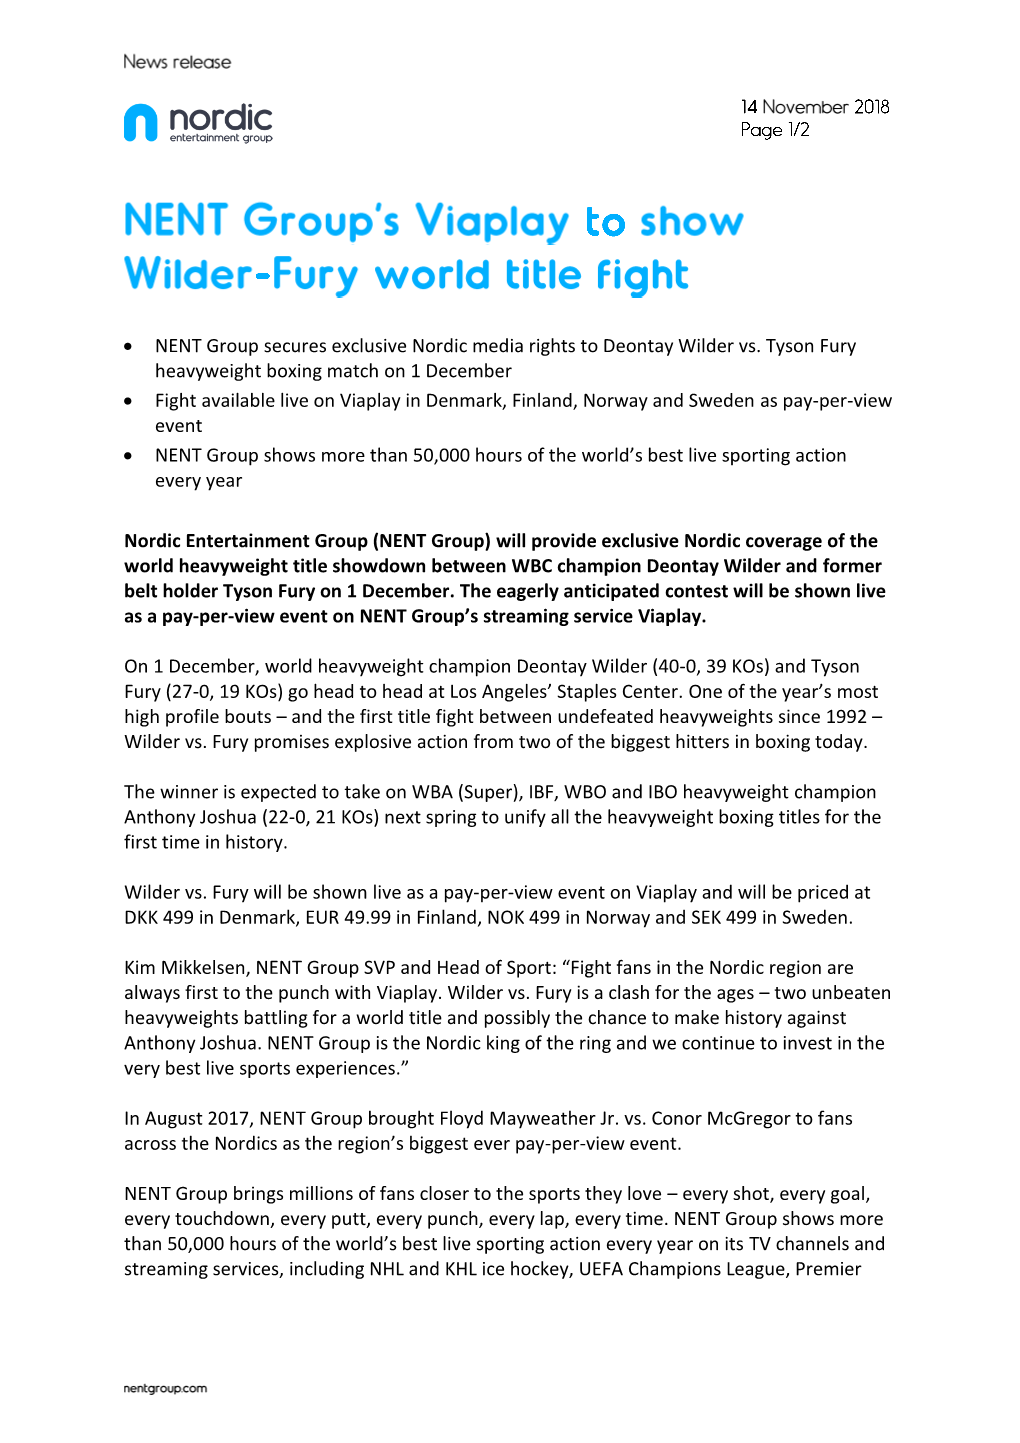 NENT Group Secures Exclusive Nordic Media Rights to Deontay Wilder Vs